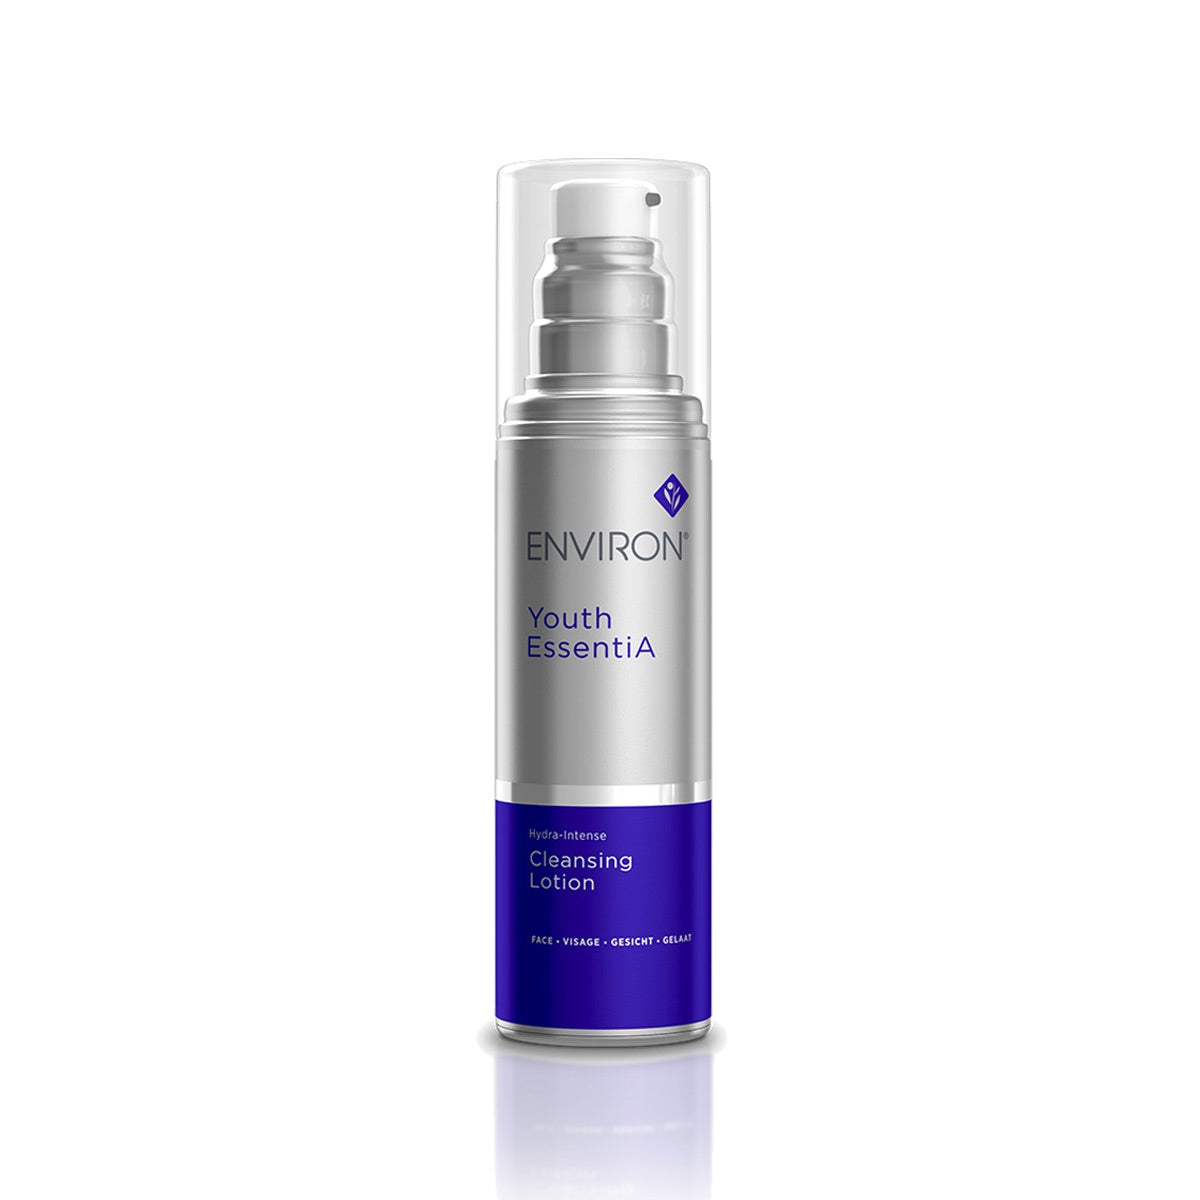 ENVIRON Youth EssentiA - Cleansing Lotion